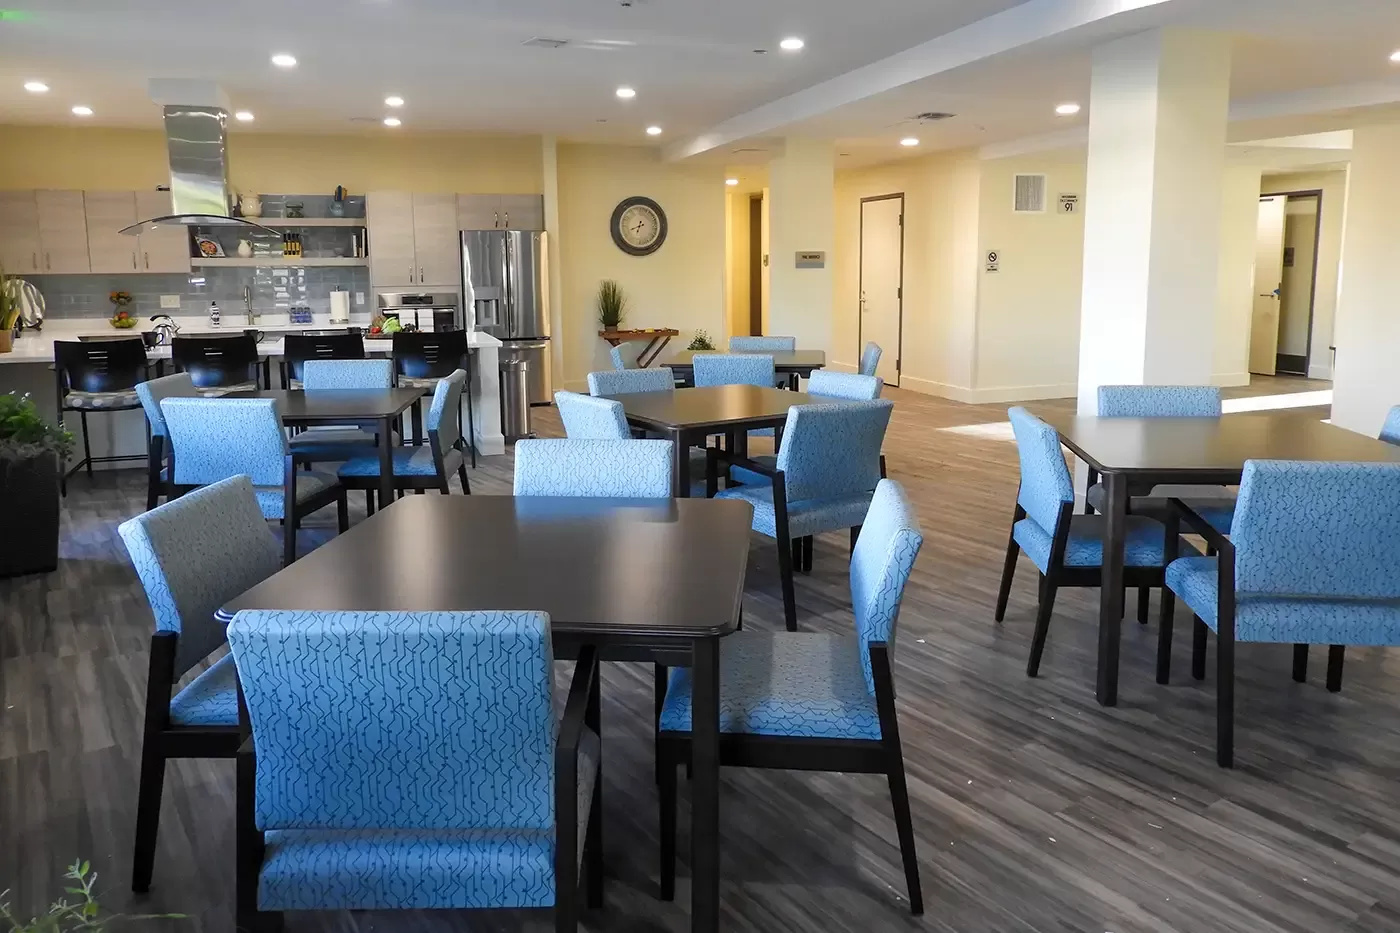 Photo of Amenities and Common Areas at The Highlands appartments in Grand Junction, Colorado